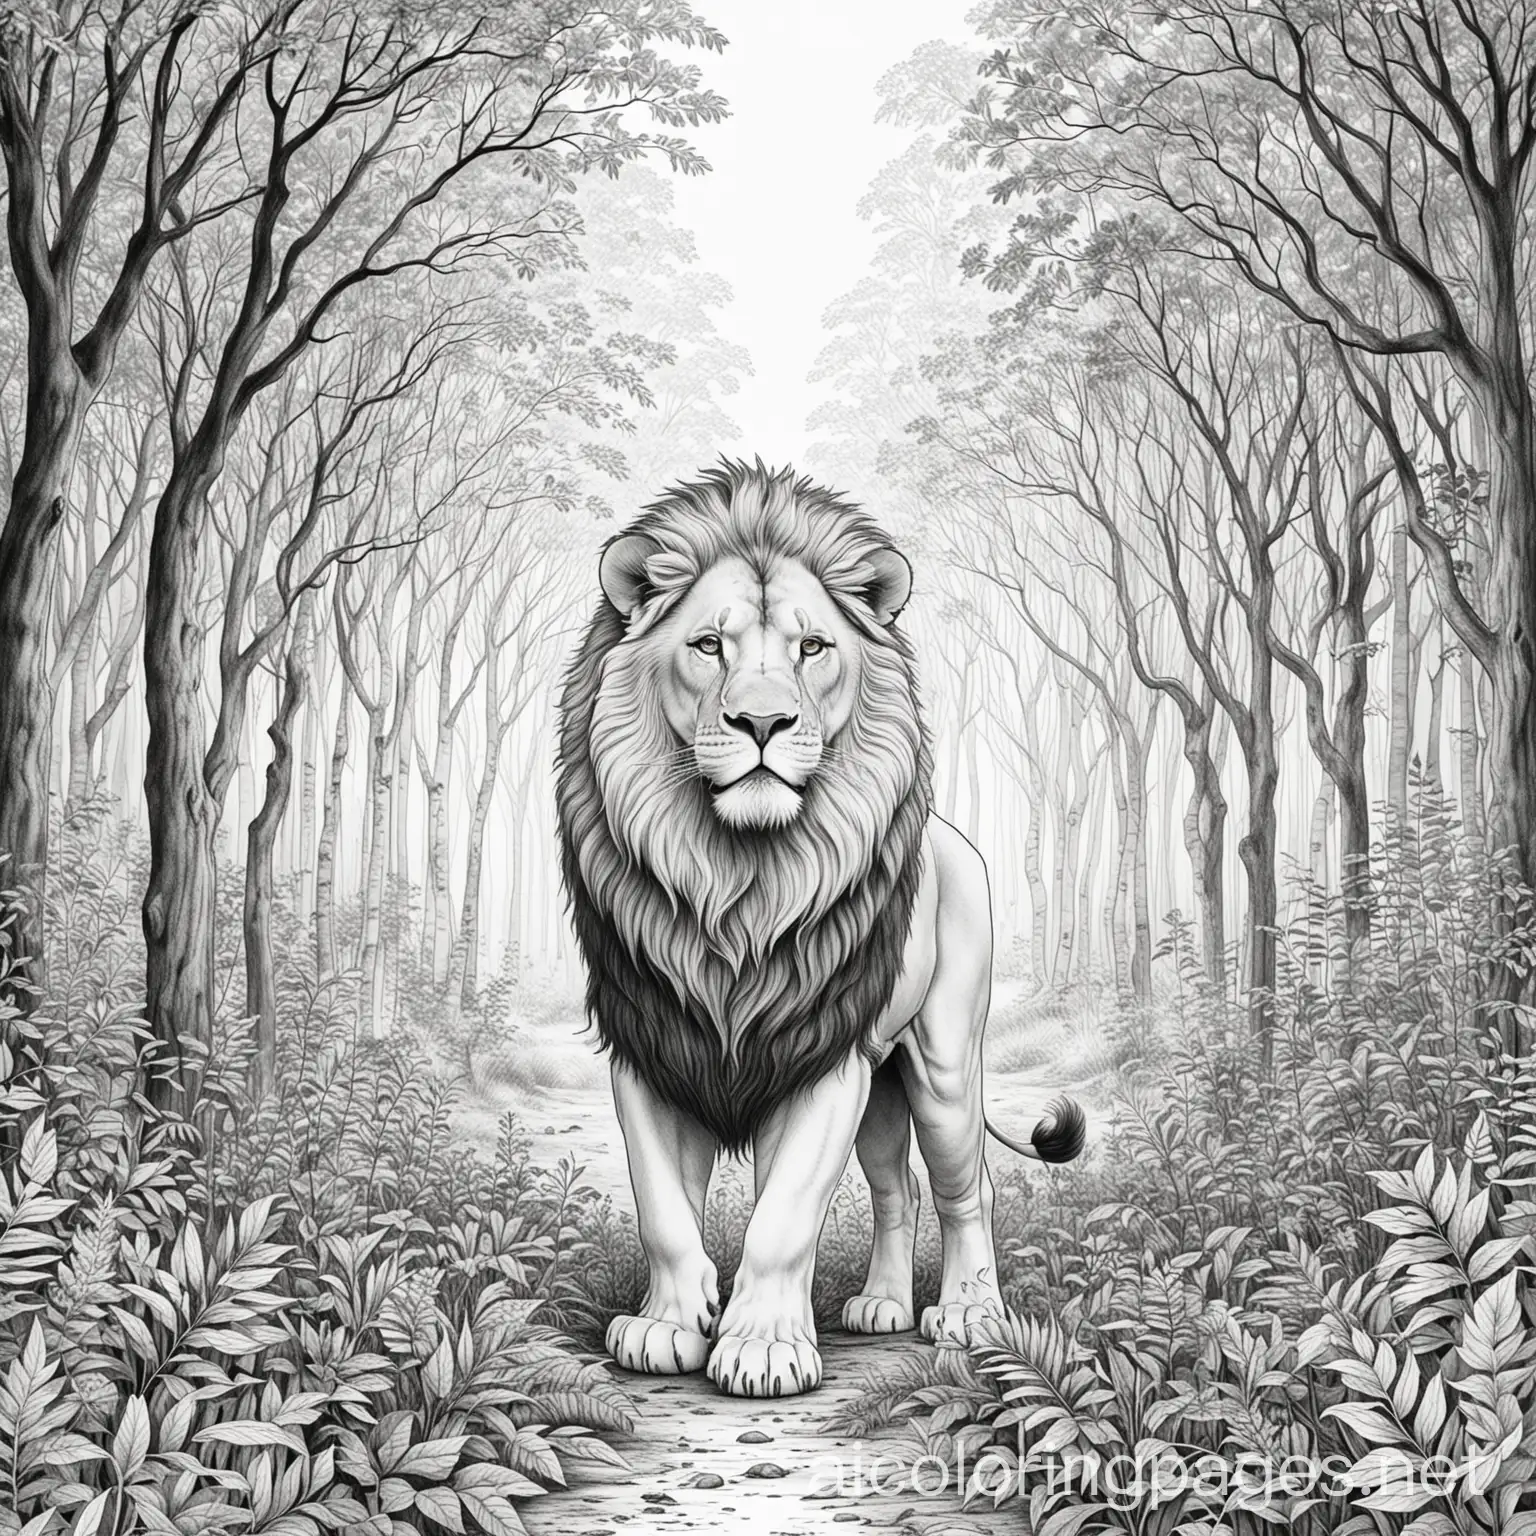 Lion-Roaming-in-Serene-Forest-Coloring-Page-for-Relaxation